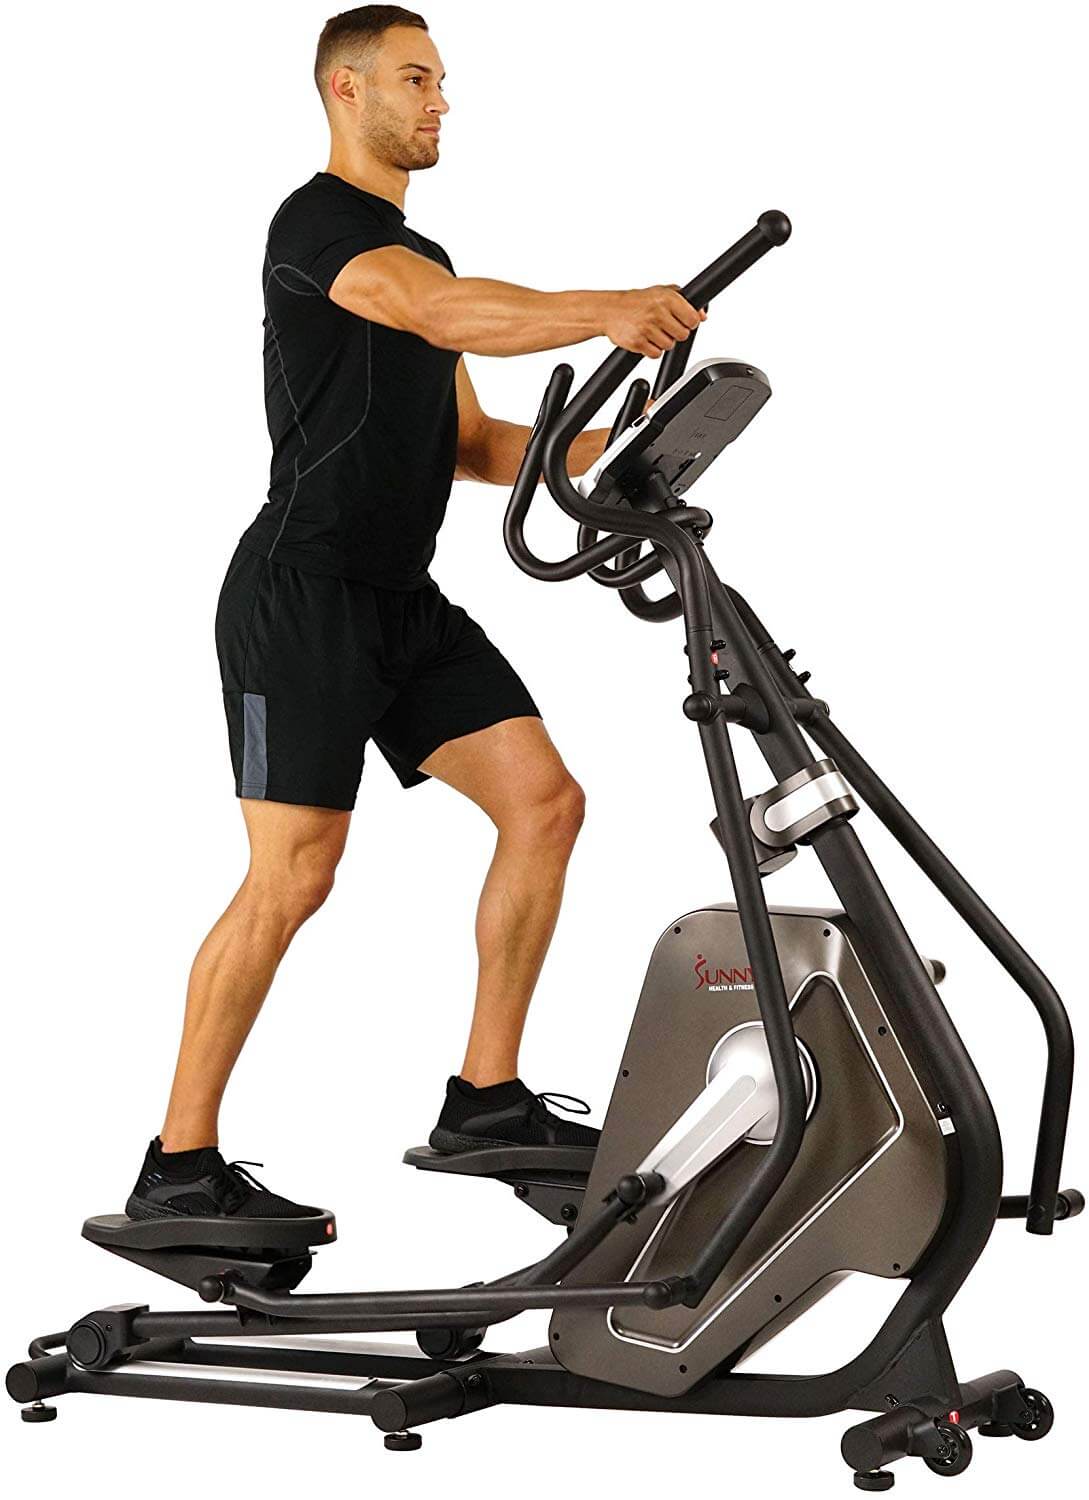 Best 5 Ellipticals For Low Ceilings For Your Basement In 2020